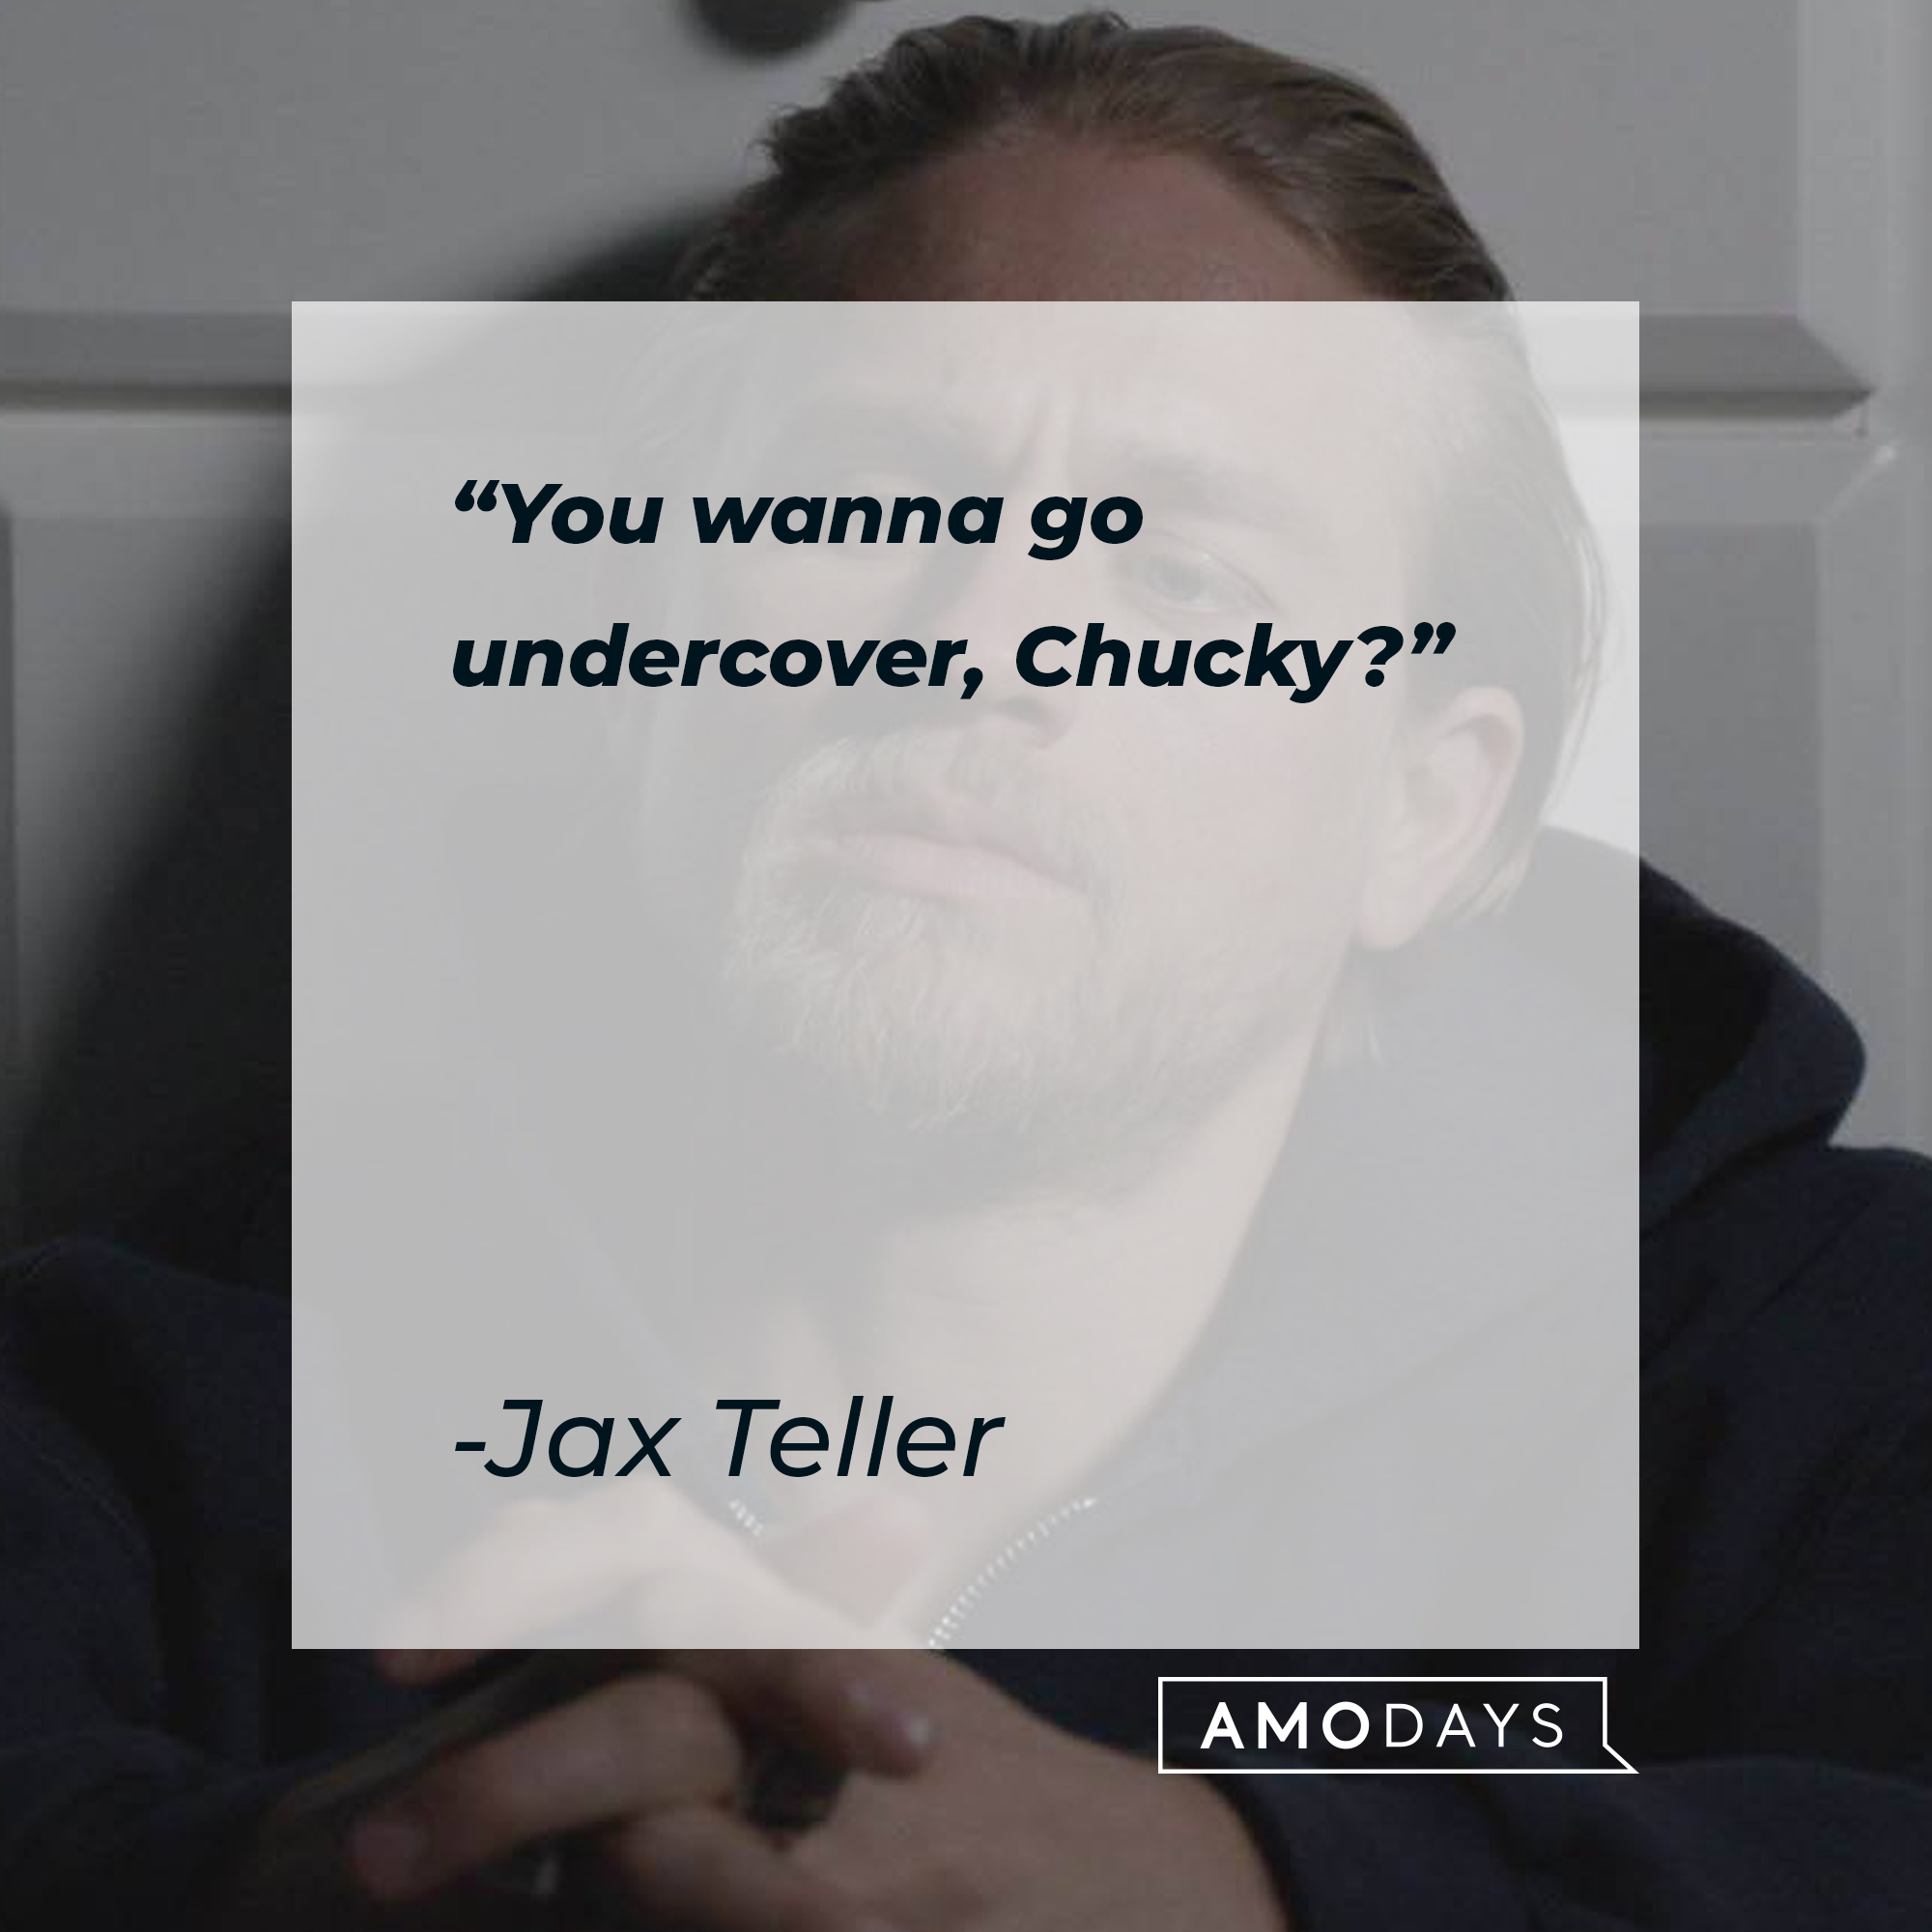 Jax Teller with his quote: “You wanna go undercover, Chucky?” |  Source: facebook.com/SonsofAnarchy